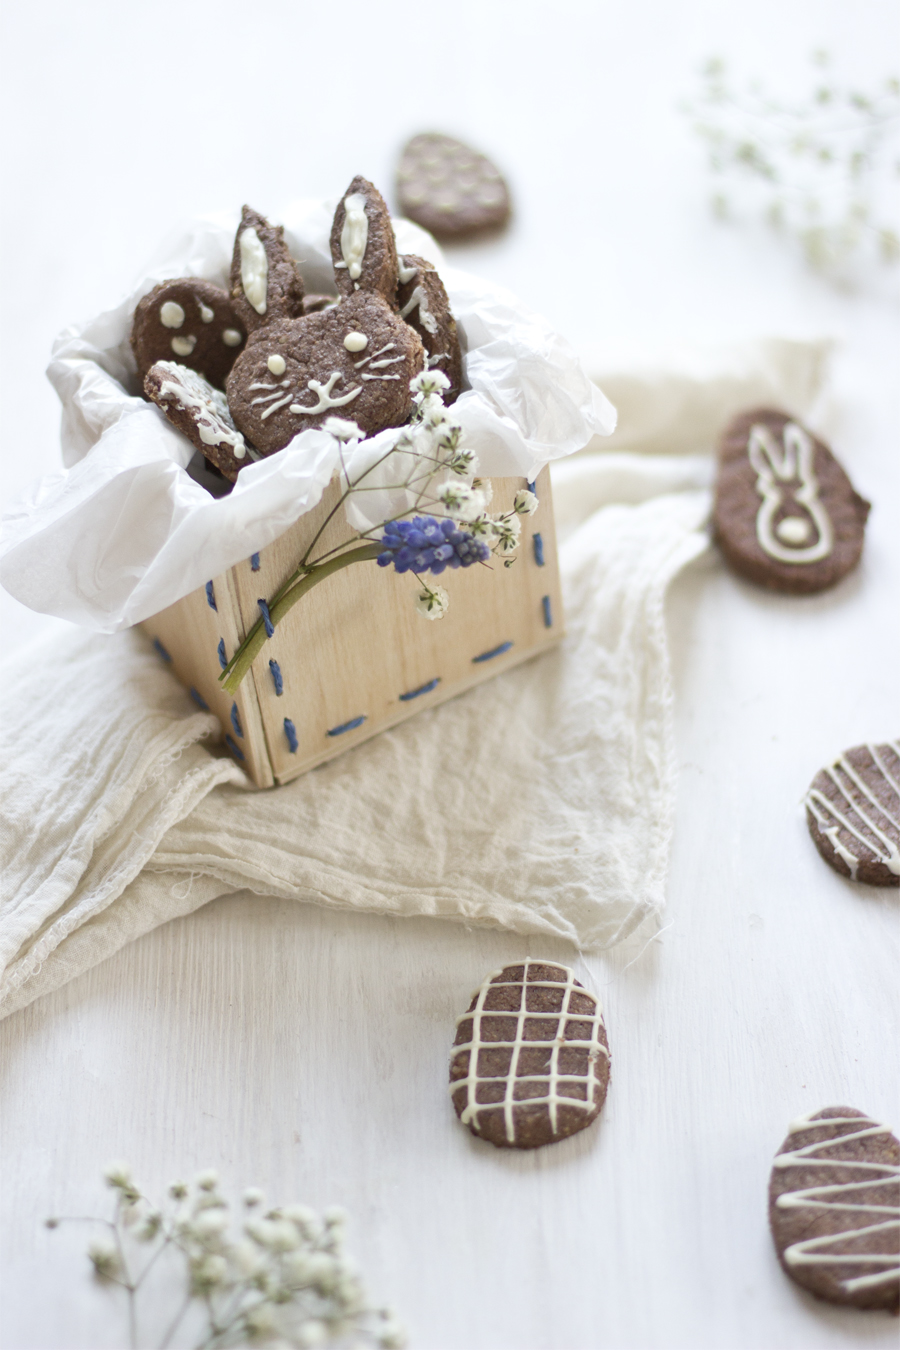 Spiced cacao easter cookies | LOOK WHAT I MADE ...